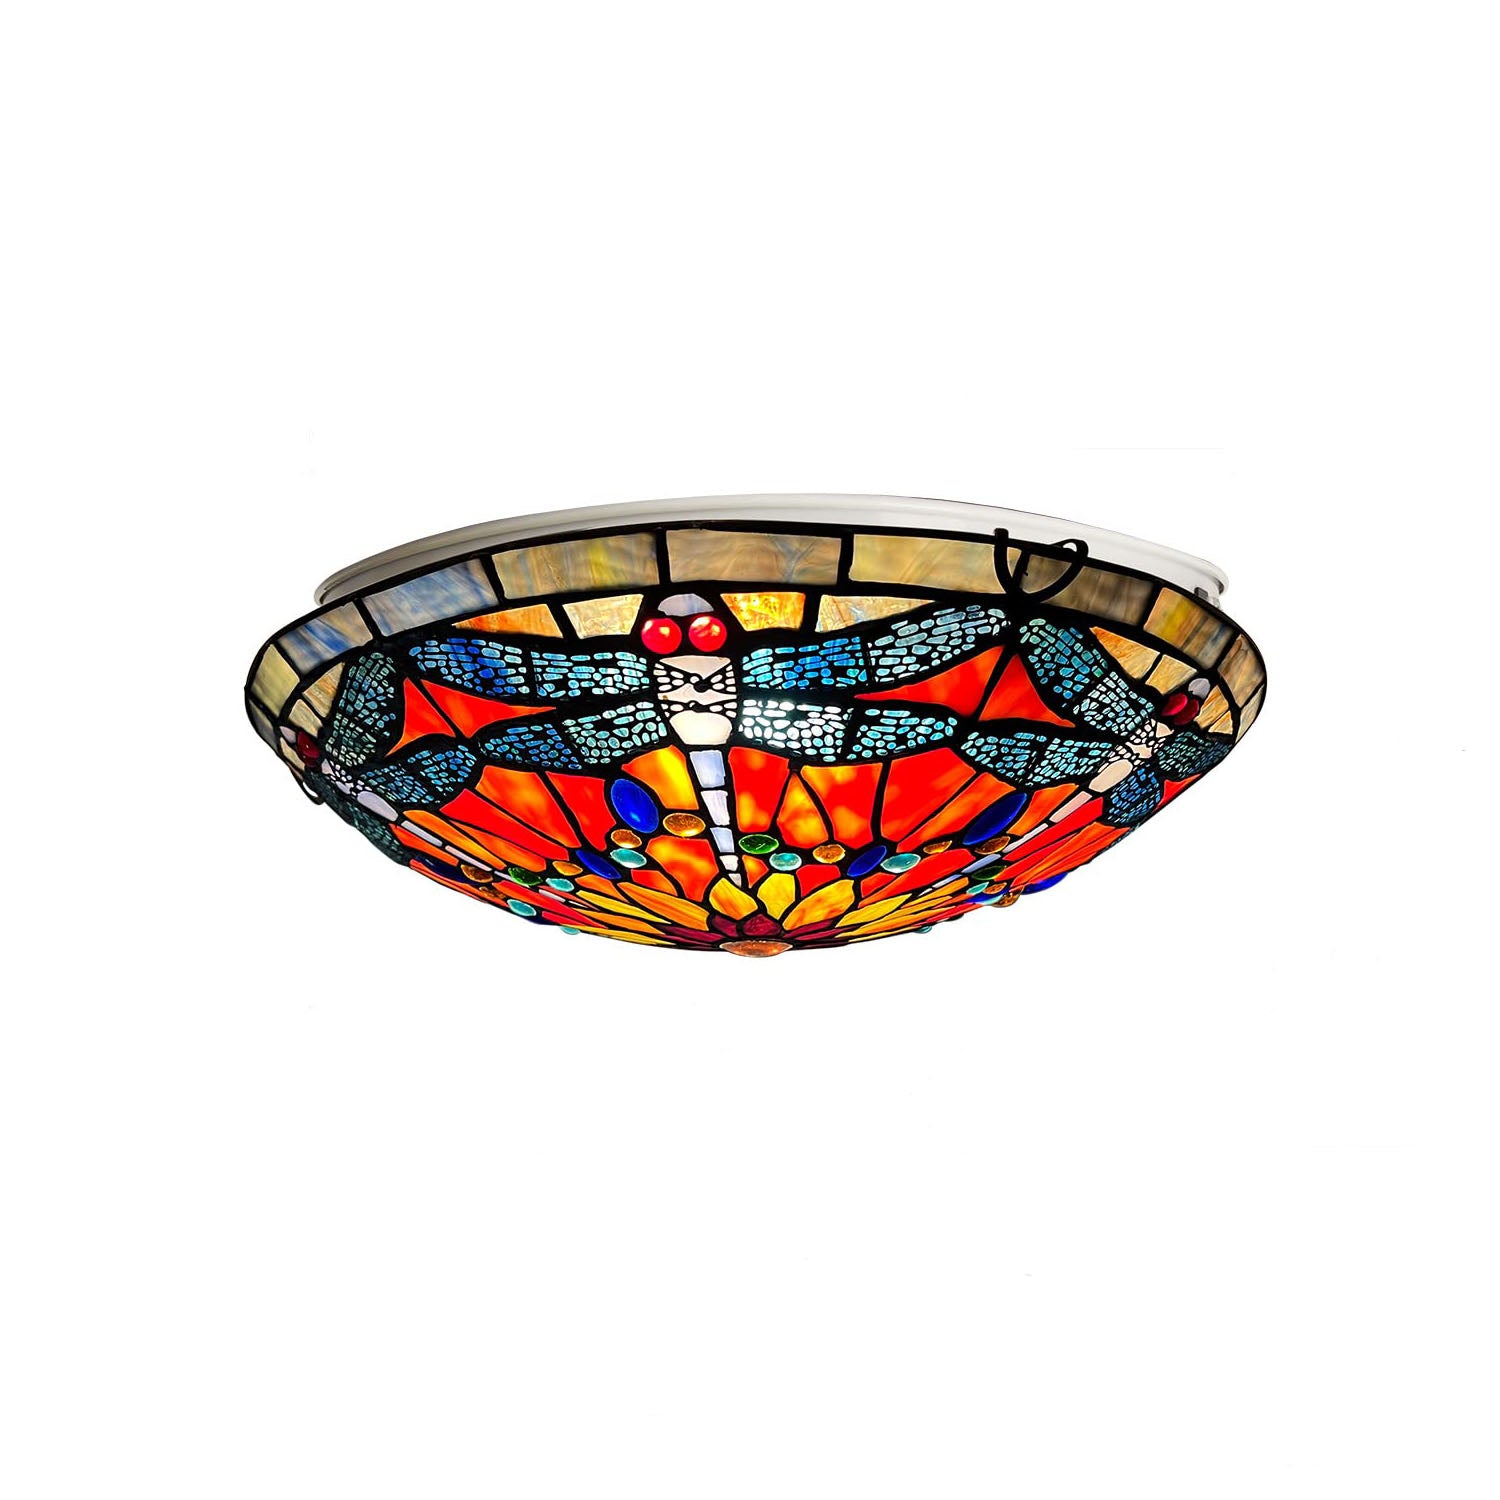 Artzone Tiffany Stained Glass Flush Mount Ceiling Light